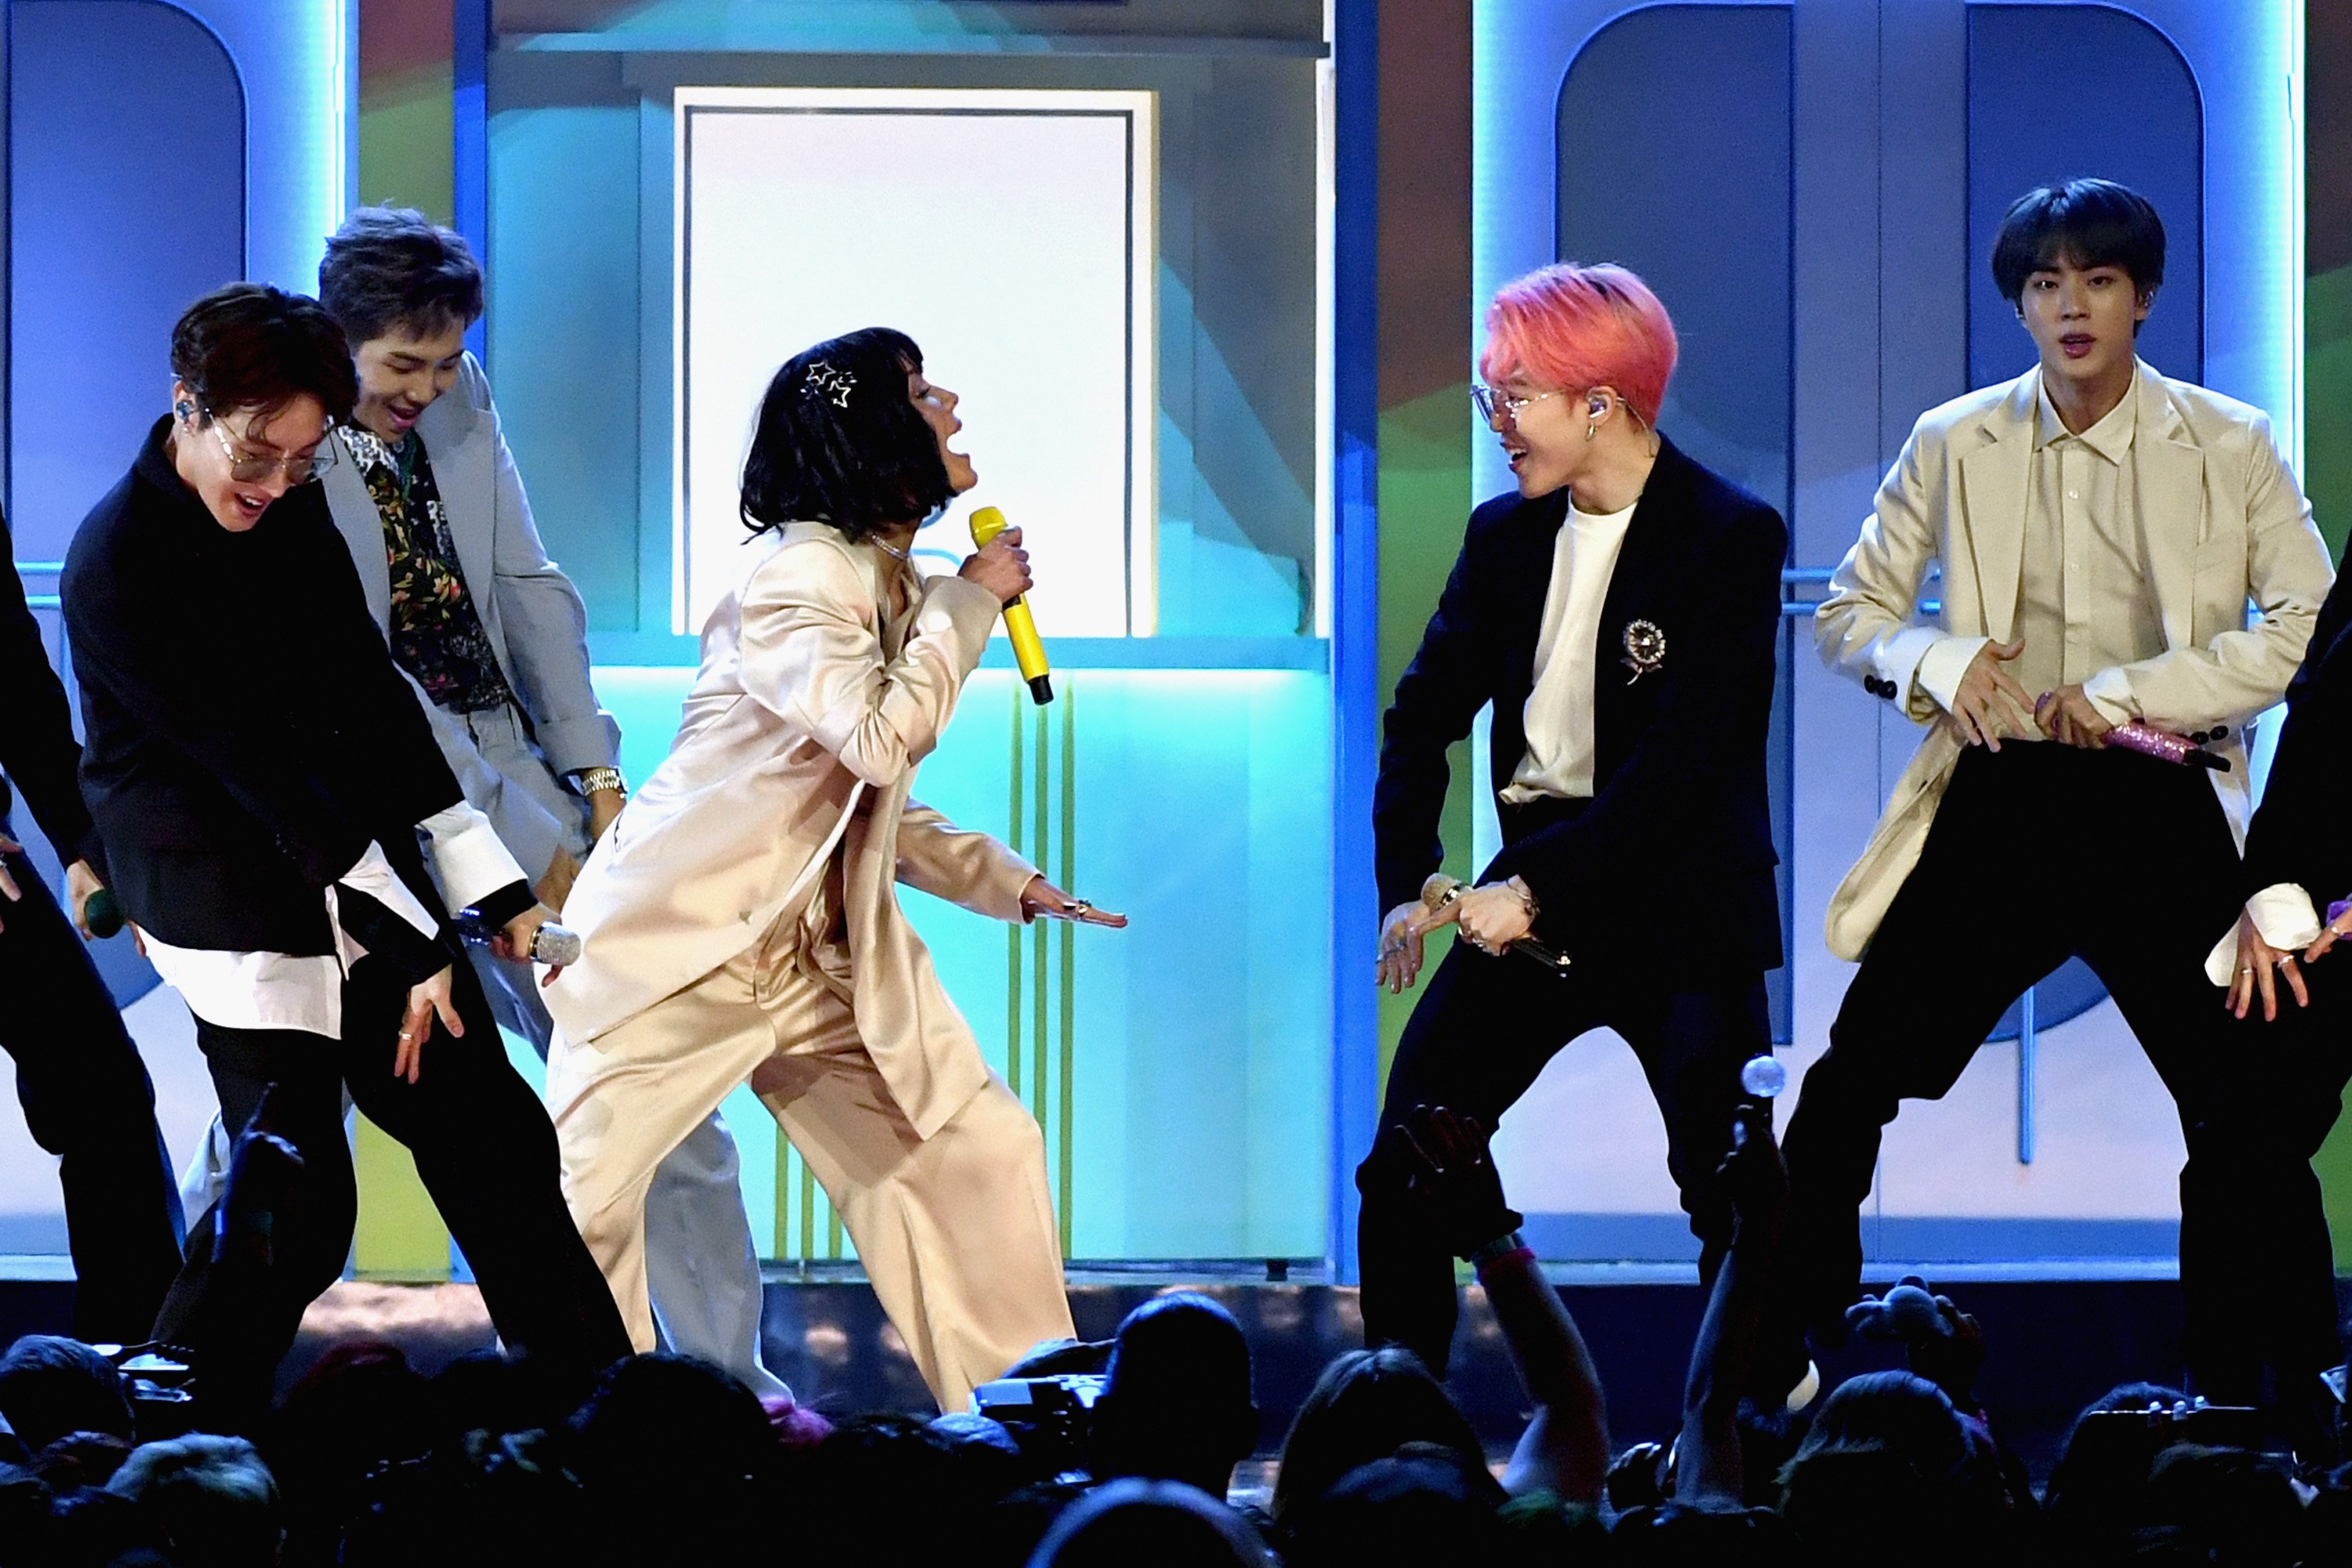 Halsey and BTS perform onstage during the 2019 Billboard Music Awards